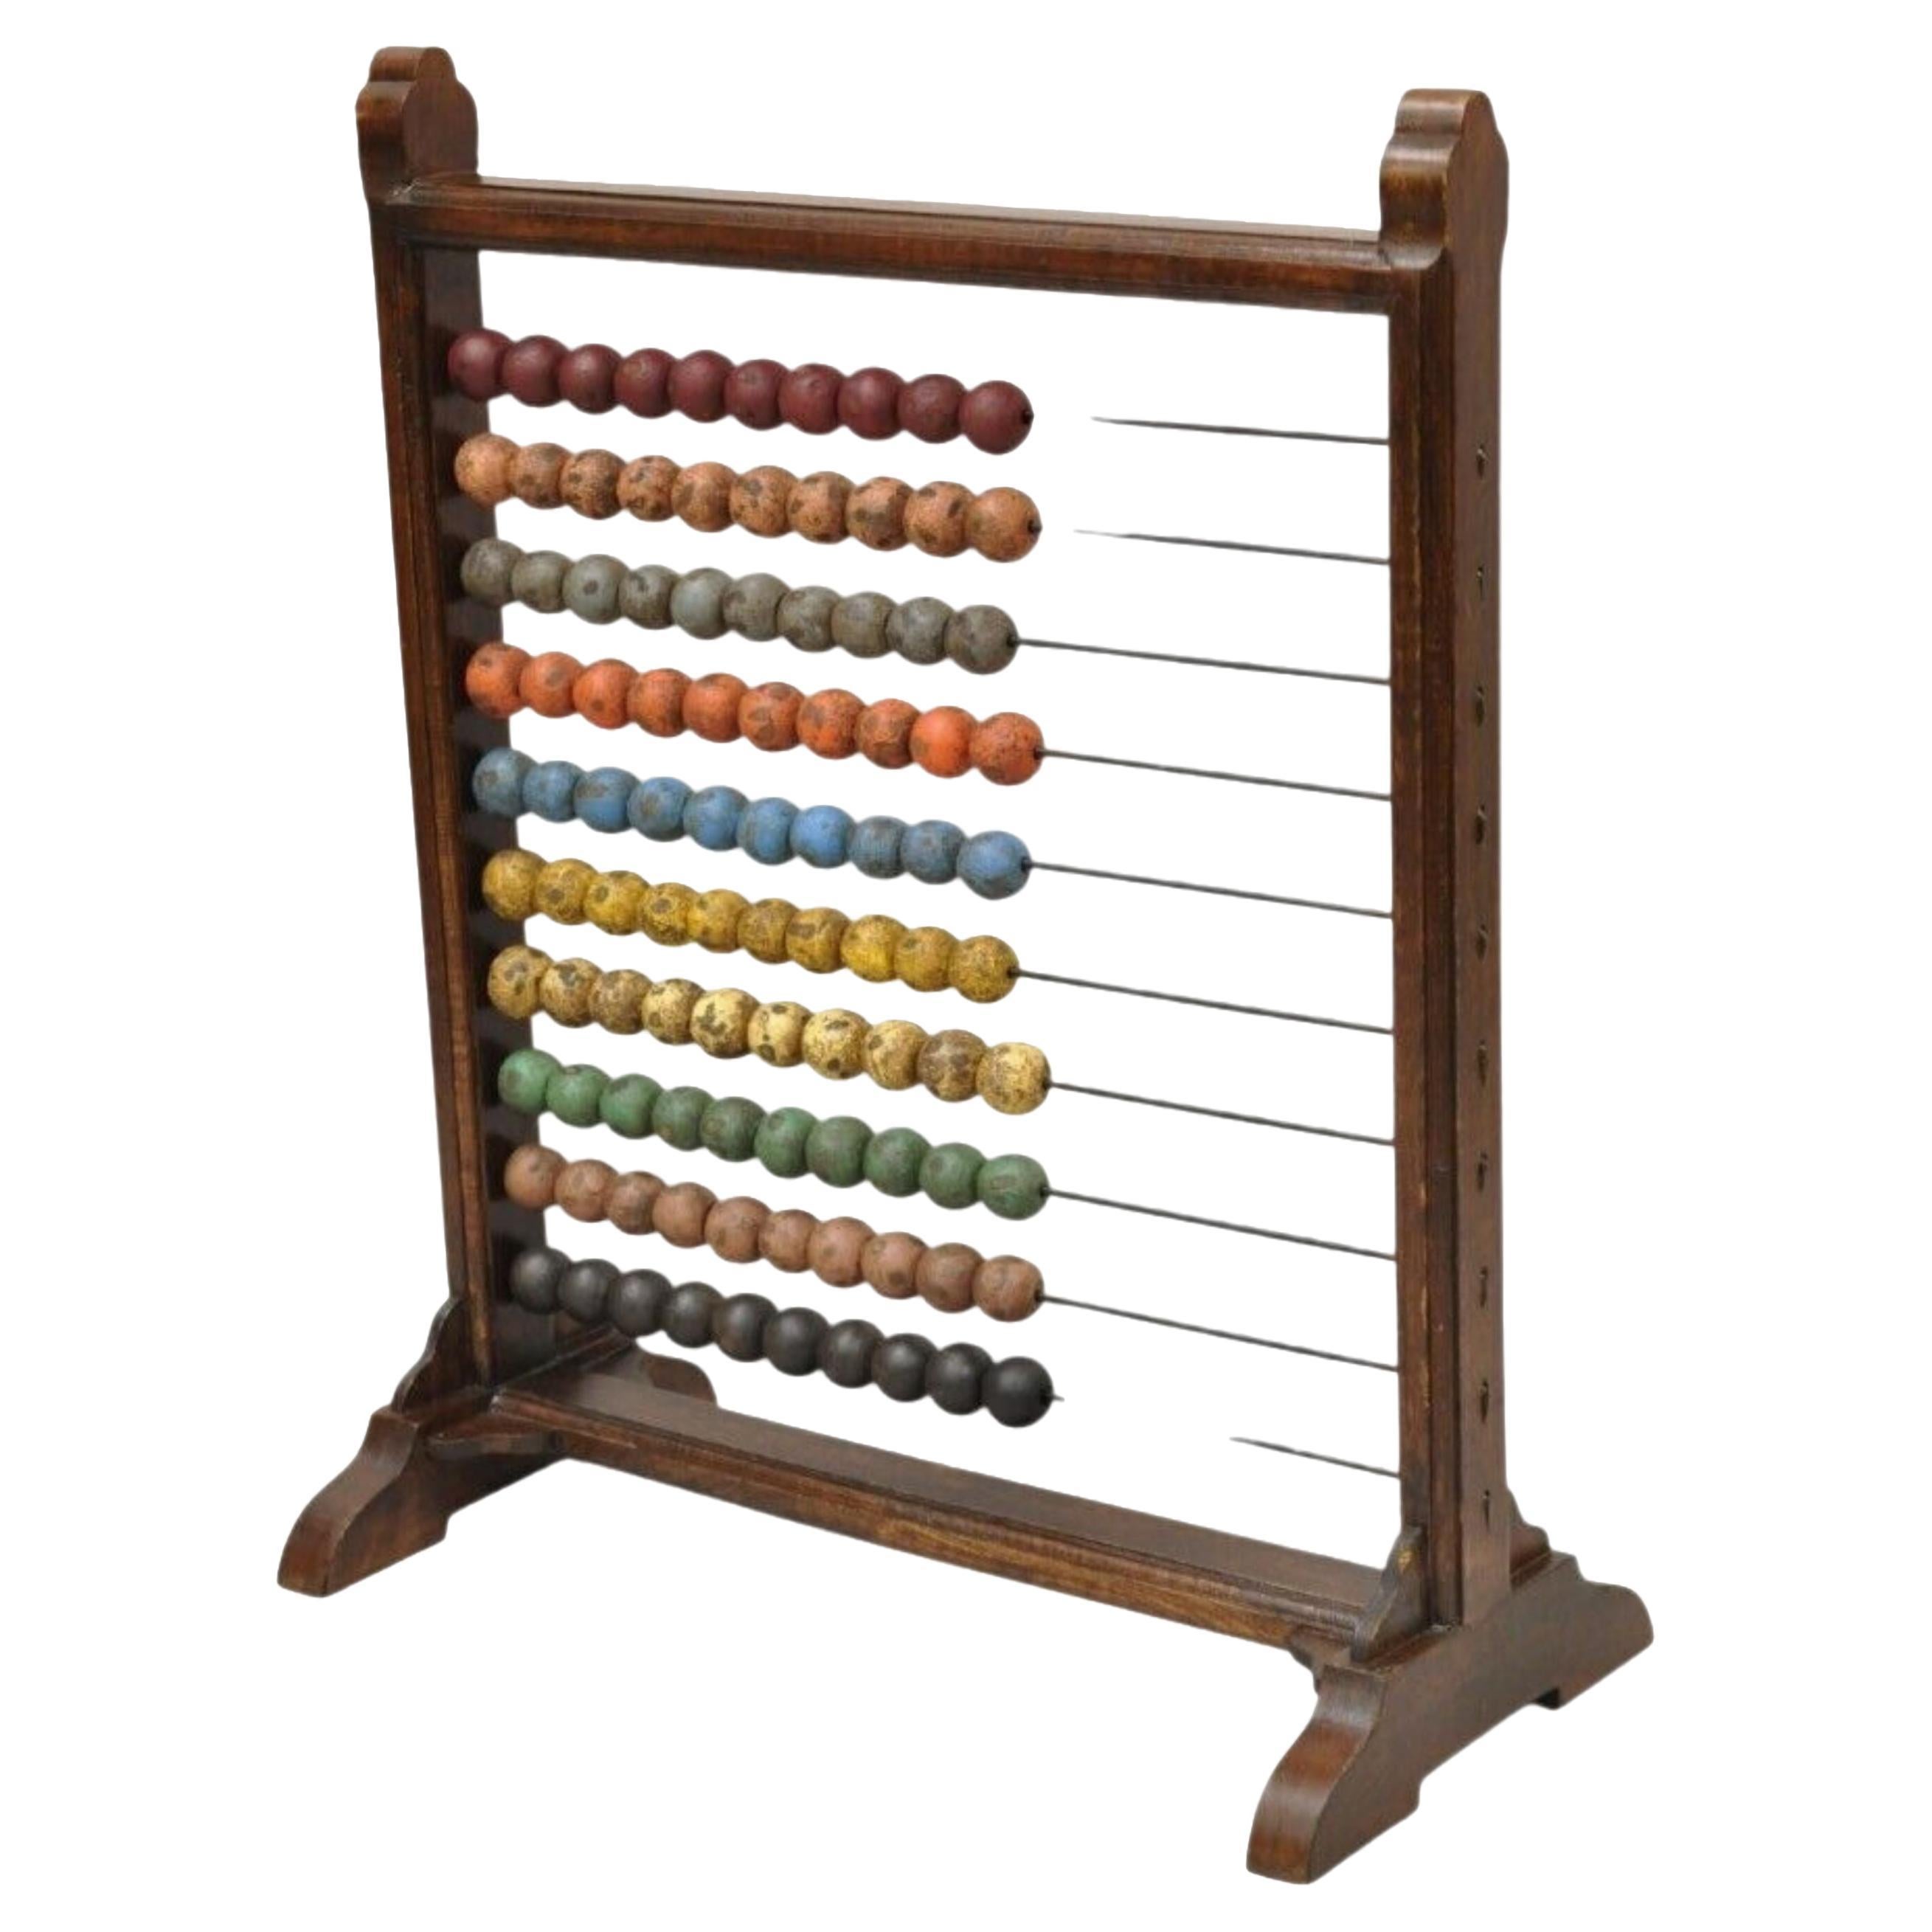 Large Vintage Mongolian Wooden Math Abacus with Painted Wooden Balls